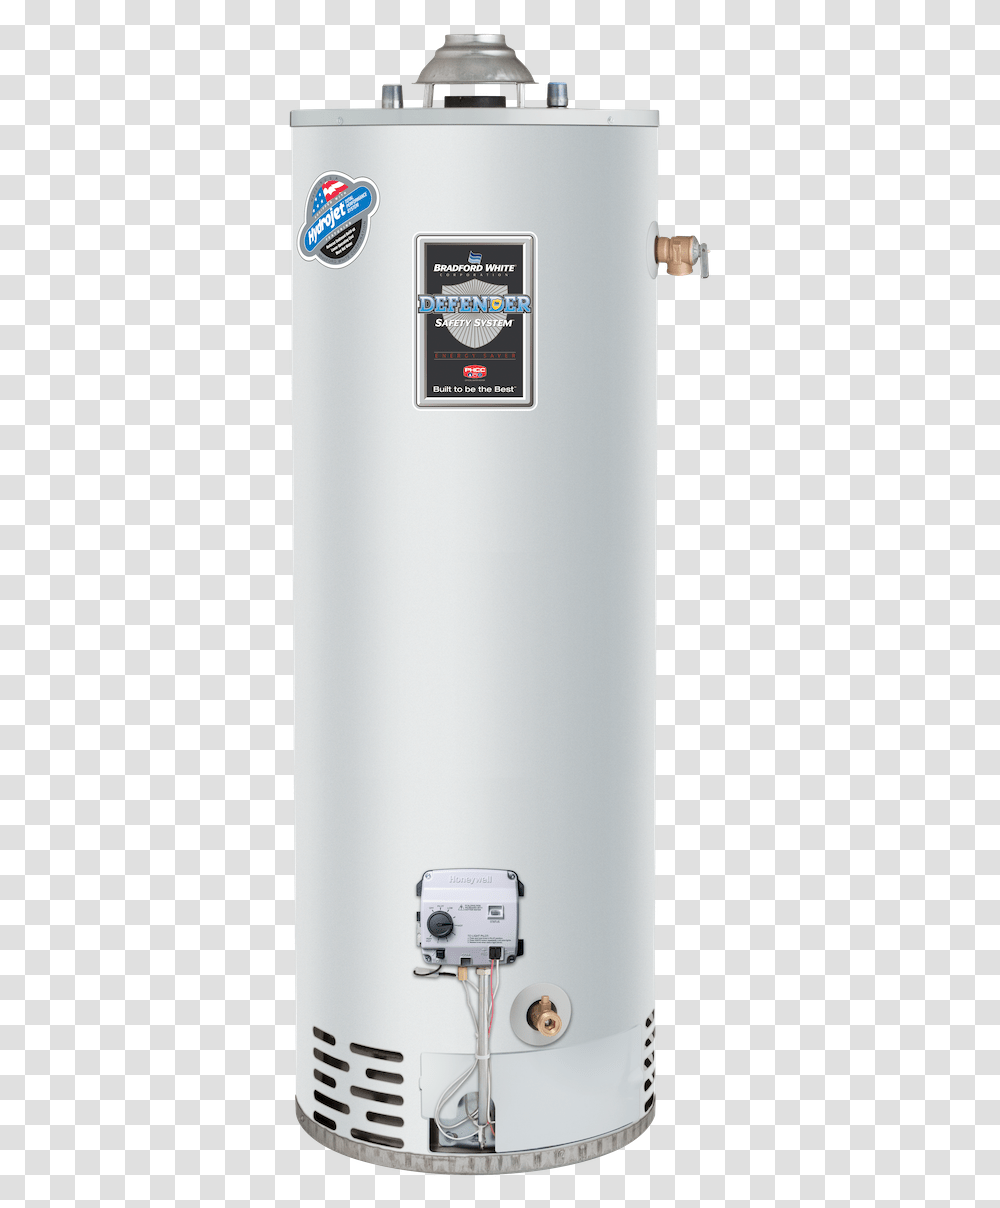 Bradford White Gas Water Heaters 50 Gallon Bradford White Water Heater, Appliance, Refrigerator, Air Conditioner, Space Heater Transparent Png